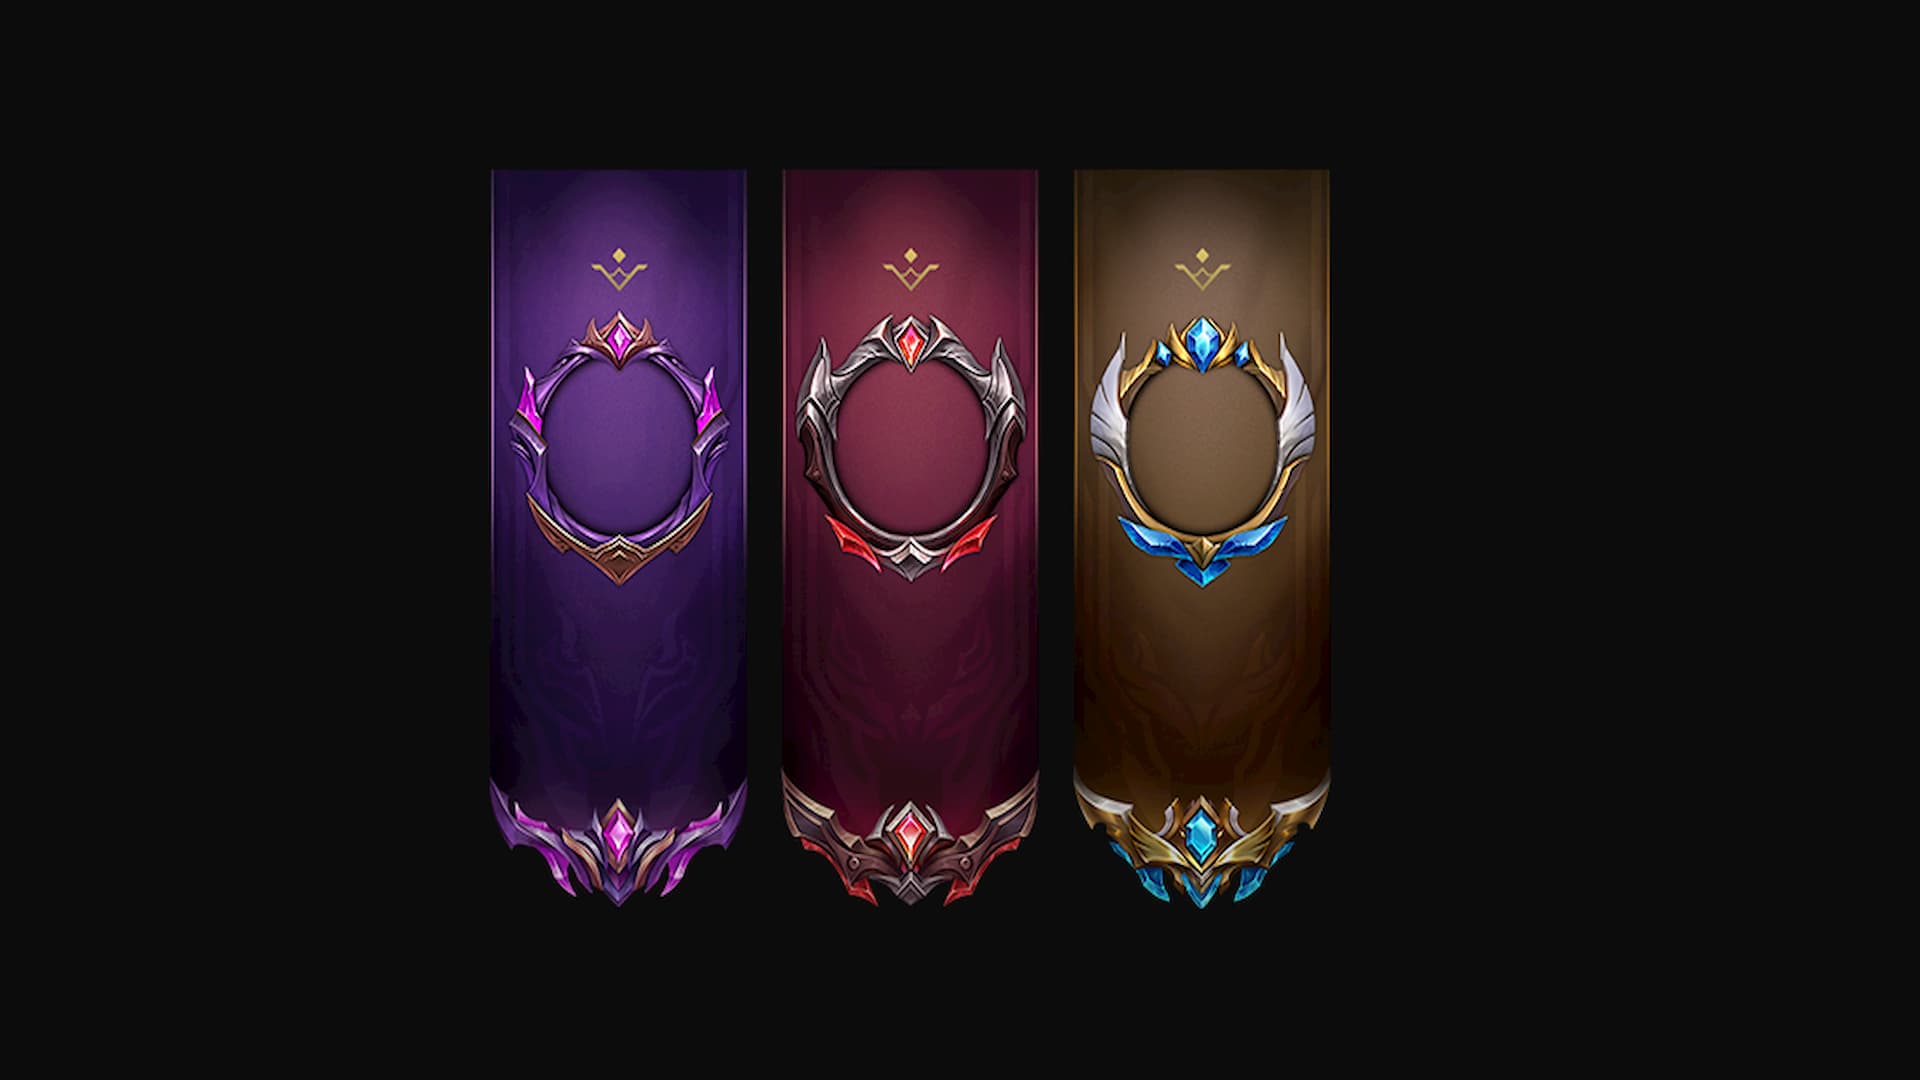 Grandmaster and Iron ranks have been added in patch 8.24 - The Rift Herald